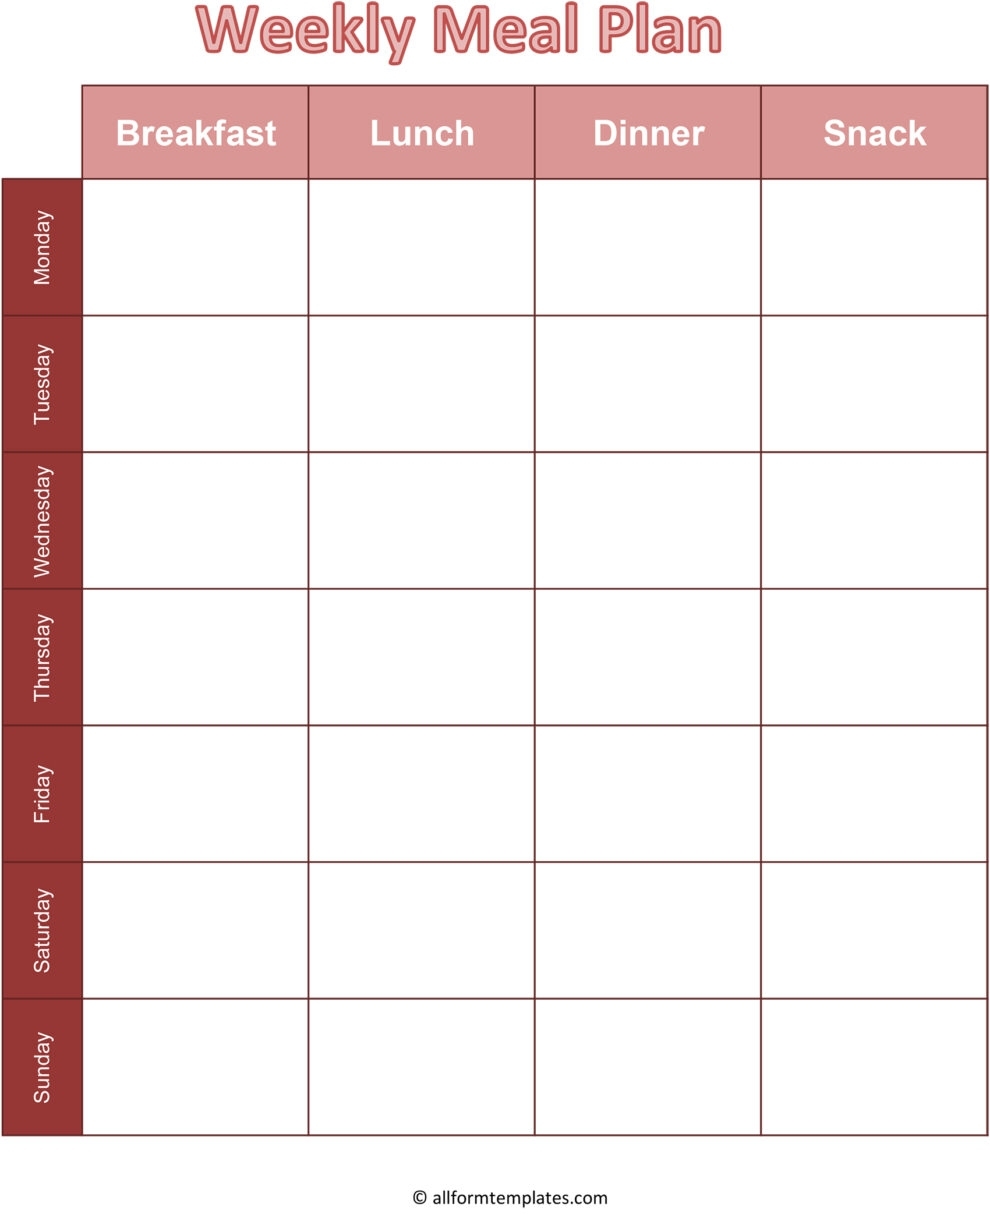 Blank-Monthly-Meal-Planner-Hd | All Form Templates throughout Blank Meal Plan Template